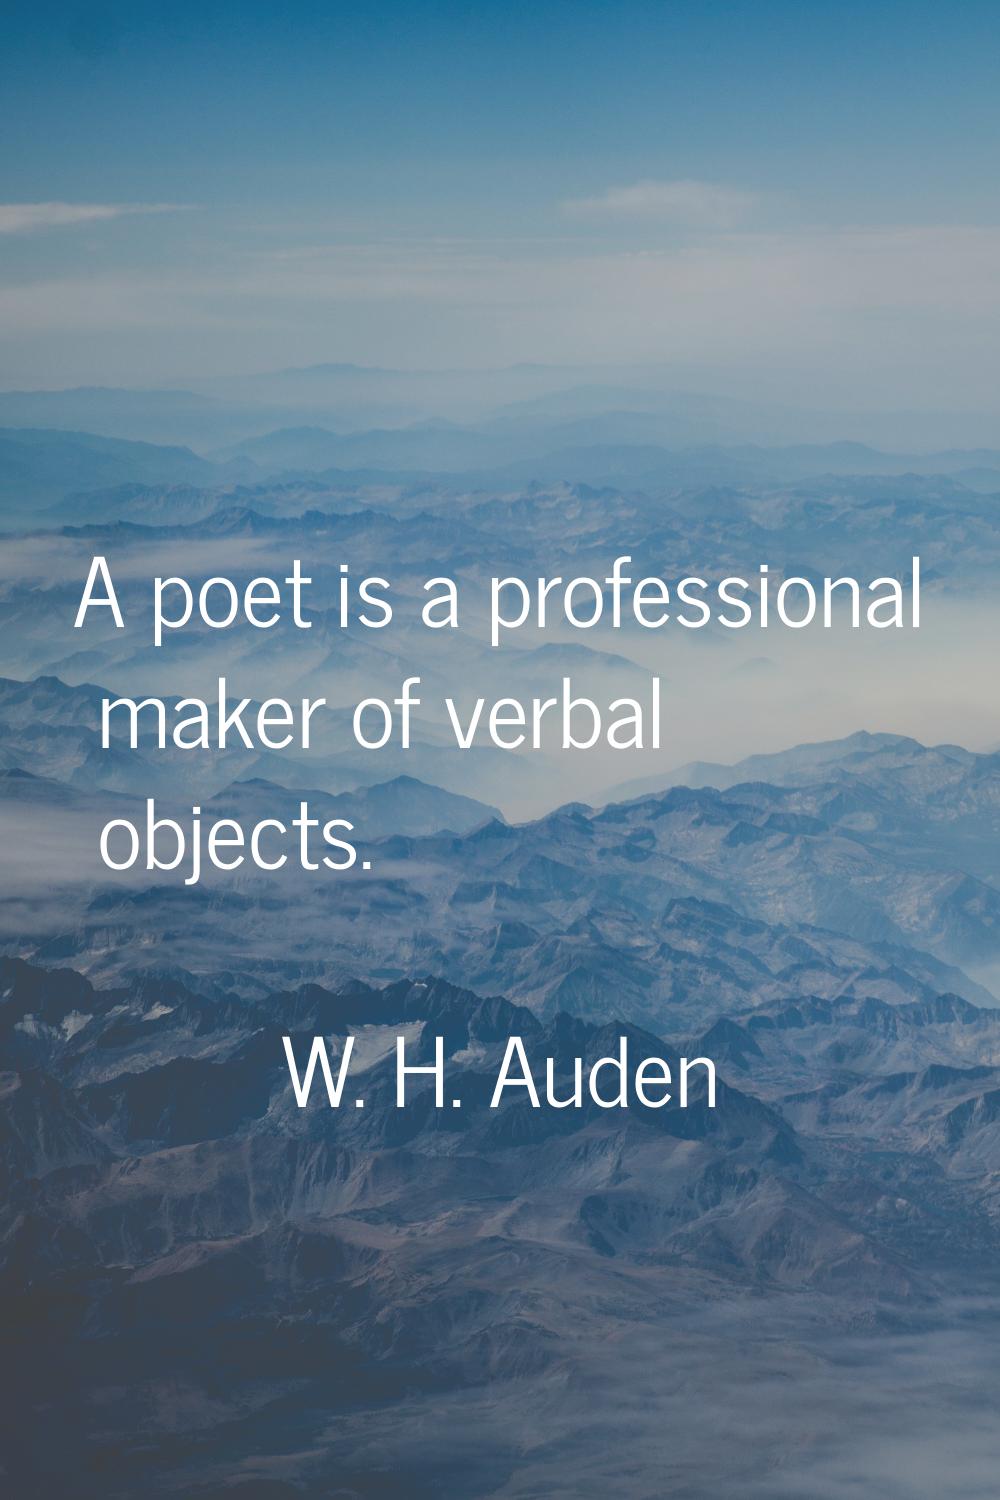 A poet is a professional maker of verbal objects.